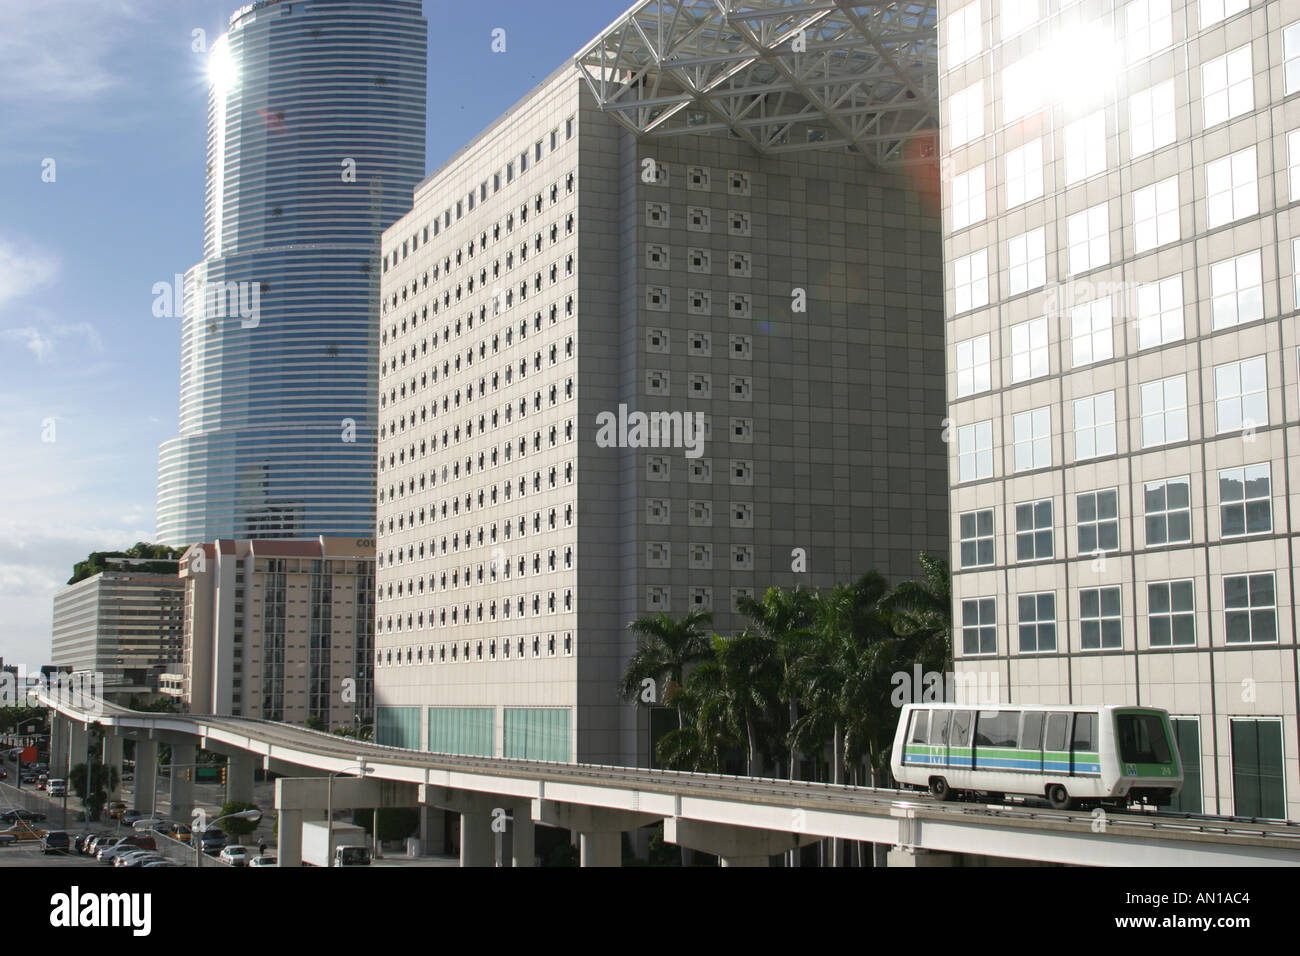 Miami Florida,Biscayne Boulevard,Metro Mover passing downtown office buildings,city skyline cityscape,city skyline,cityscape,architecture,architectura Stock Photo